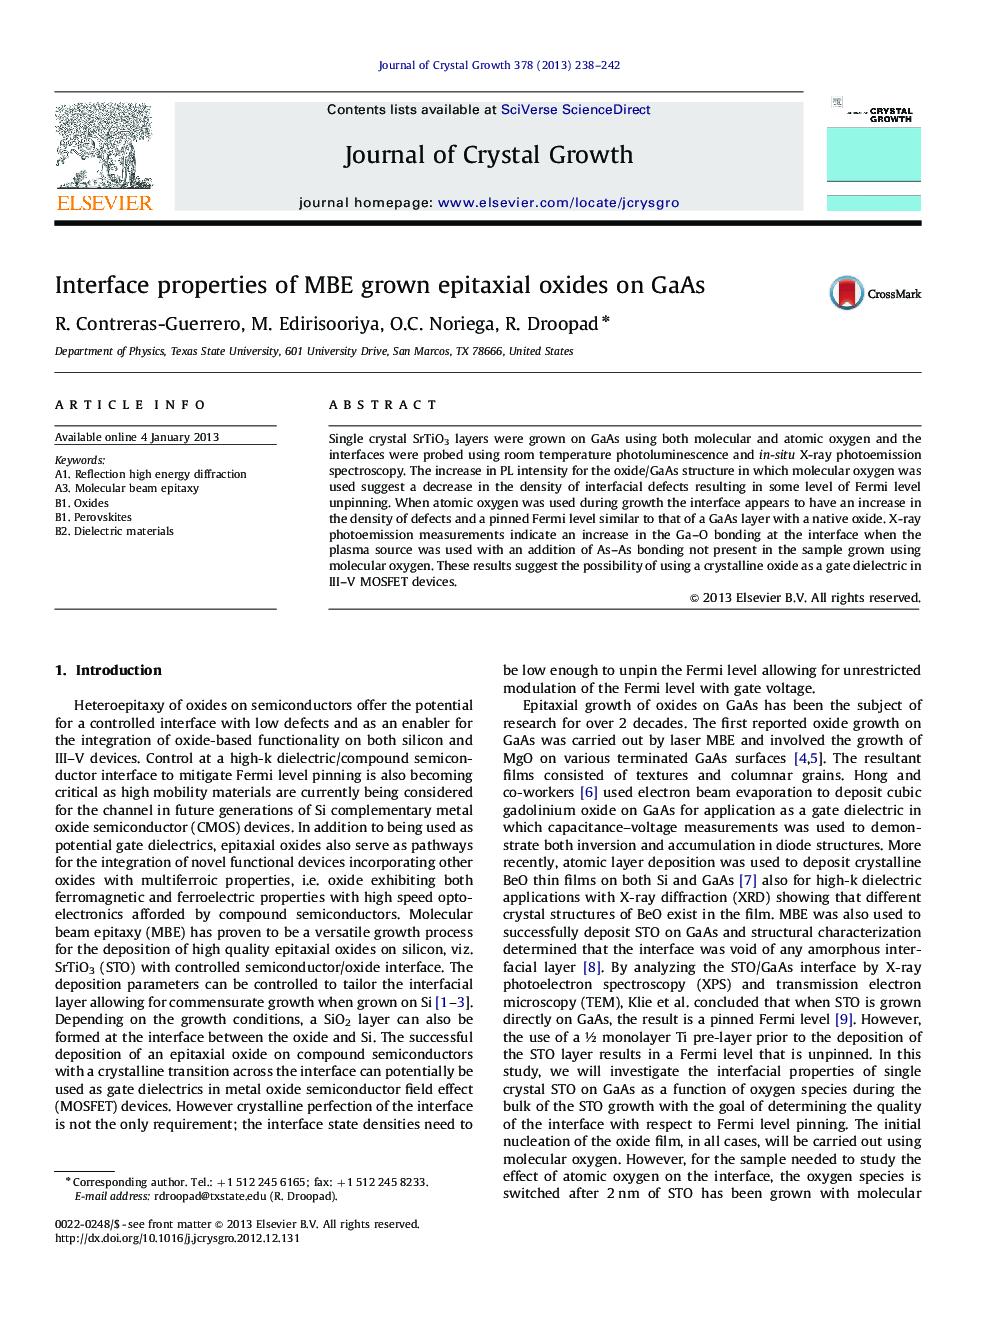 Interface properties of MBE grown epitaxial oxides on GaAs